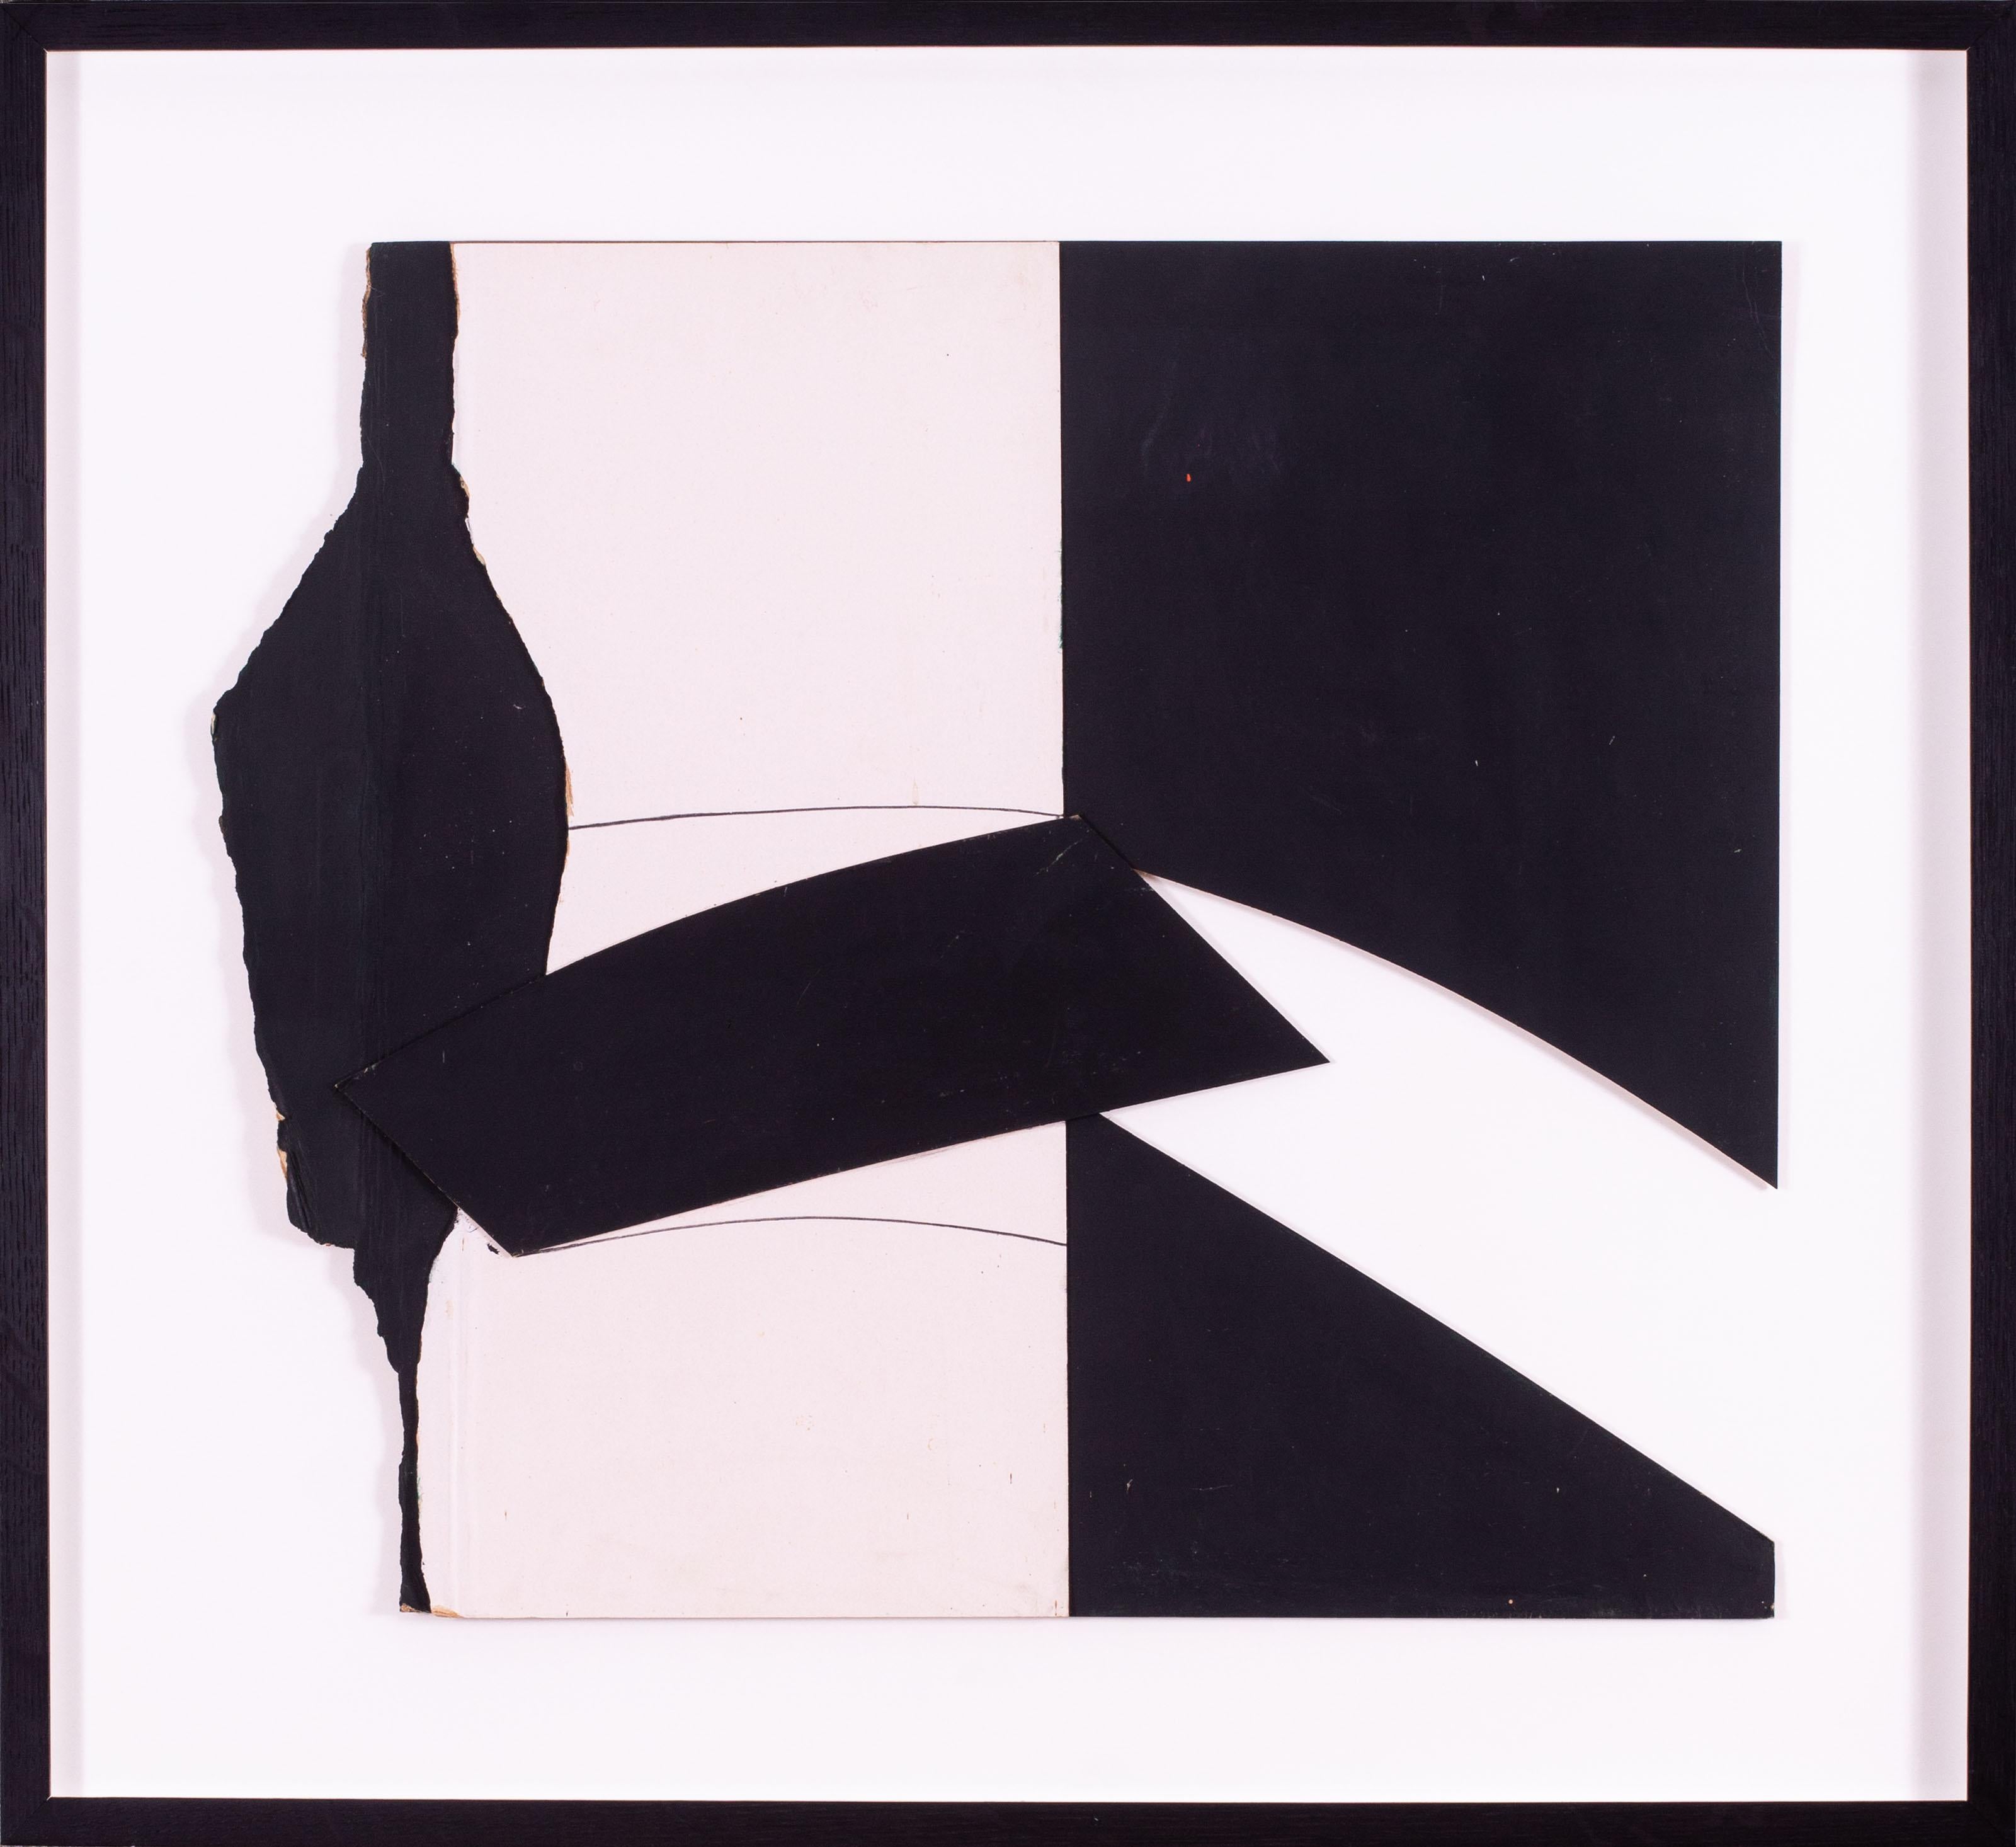 A very striking and stylish 1970s black and white collage work by the prominent St. Ives artist Trevor Bell.

The details of the work are as followS:

TREVOR BELL (BRITISH, 1930-2017)
SLIDE
titled, dated and signed on the reverse 'SLIDE' / 1970 /